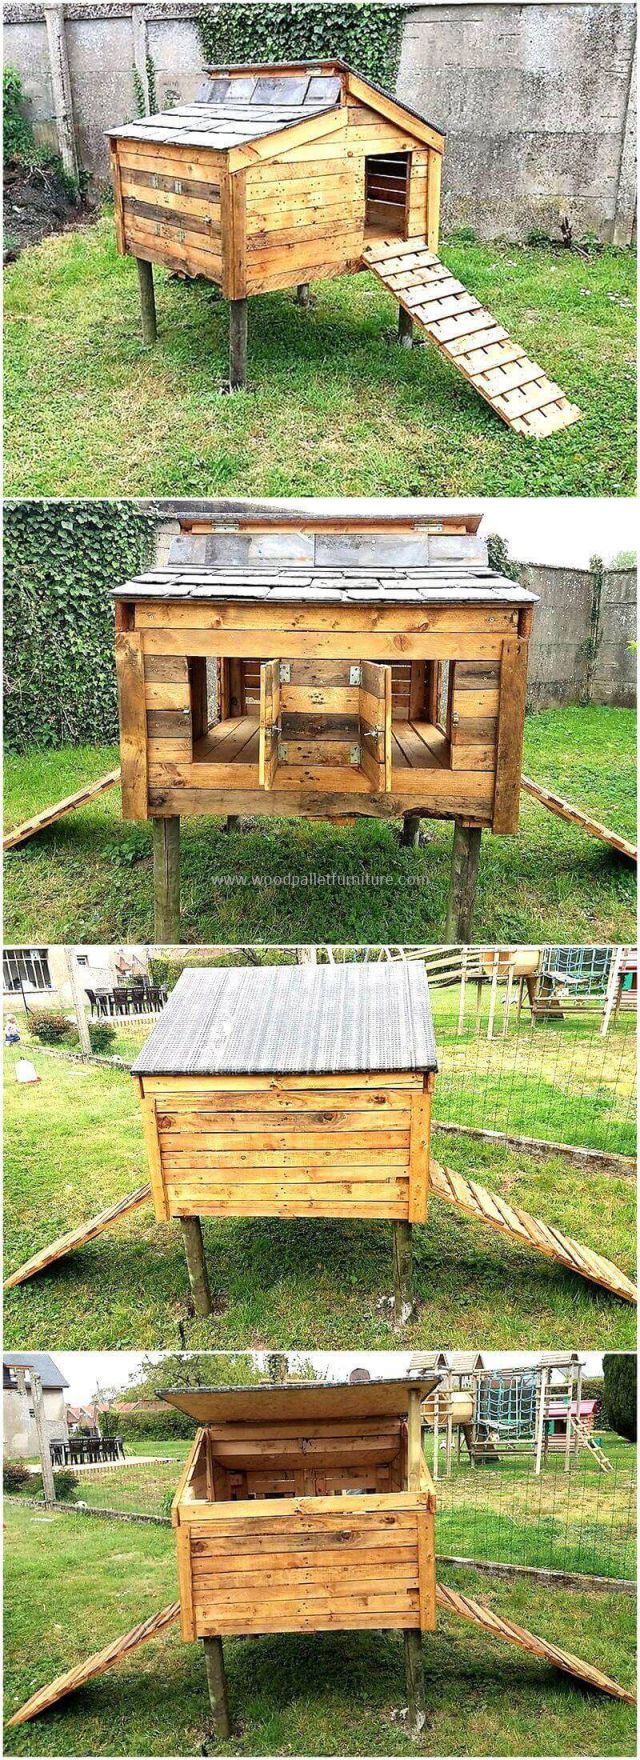 Amazing Pallet Ideas For Outdoors